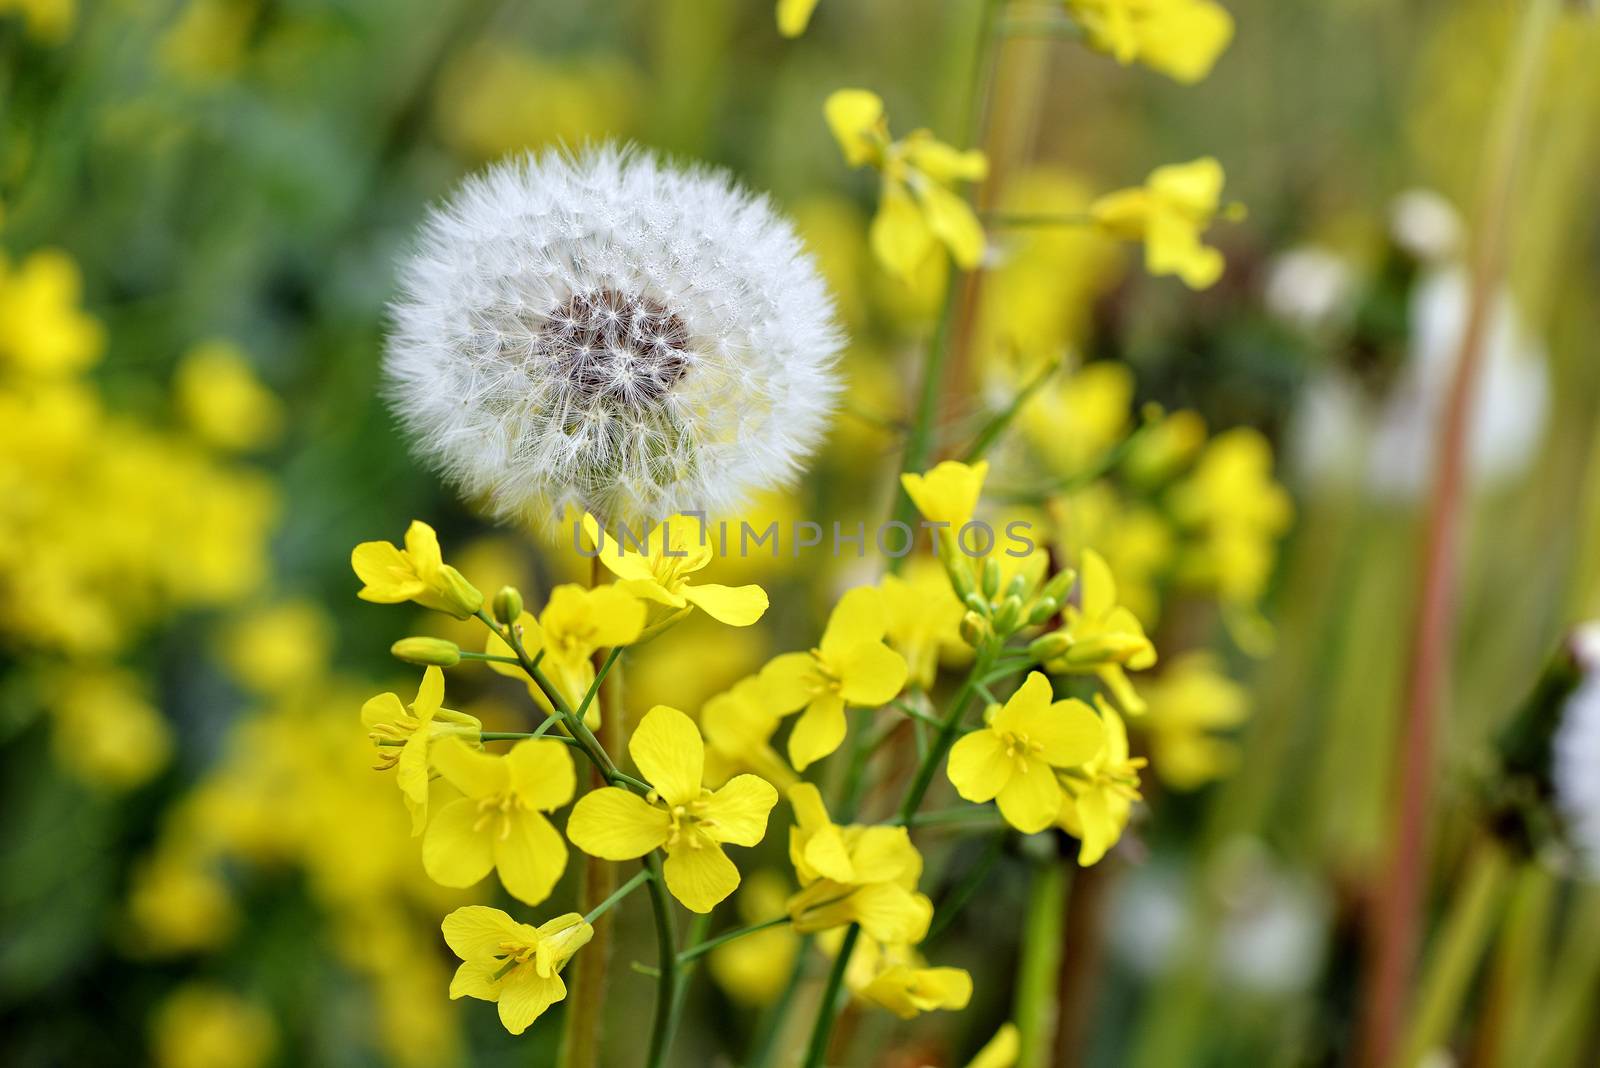 Selective focus close-up photography. It is flowering dandelion by askoldsb